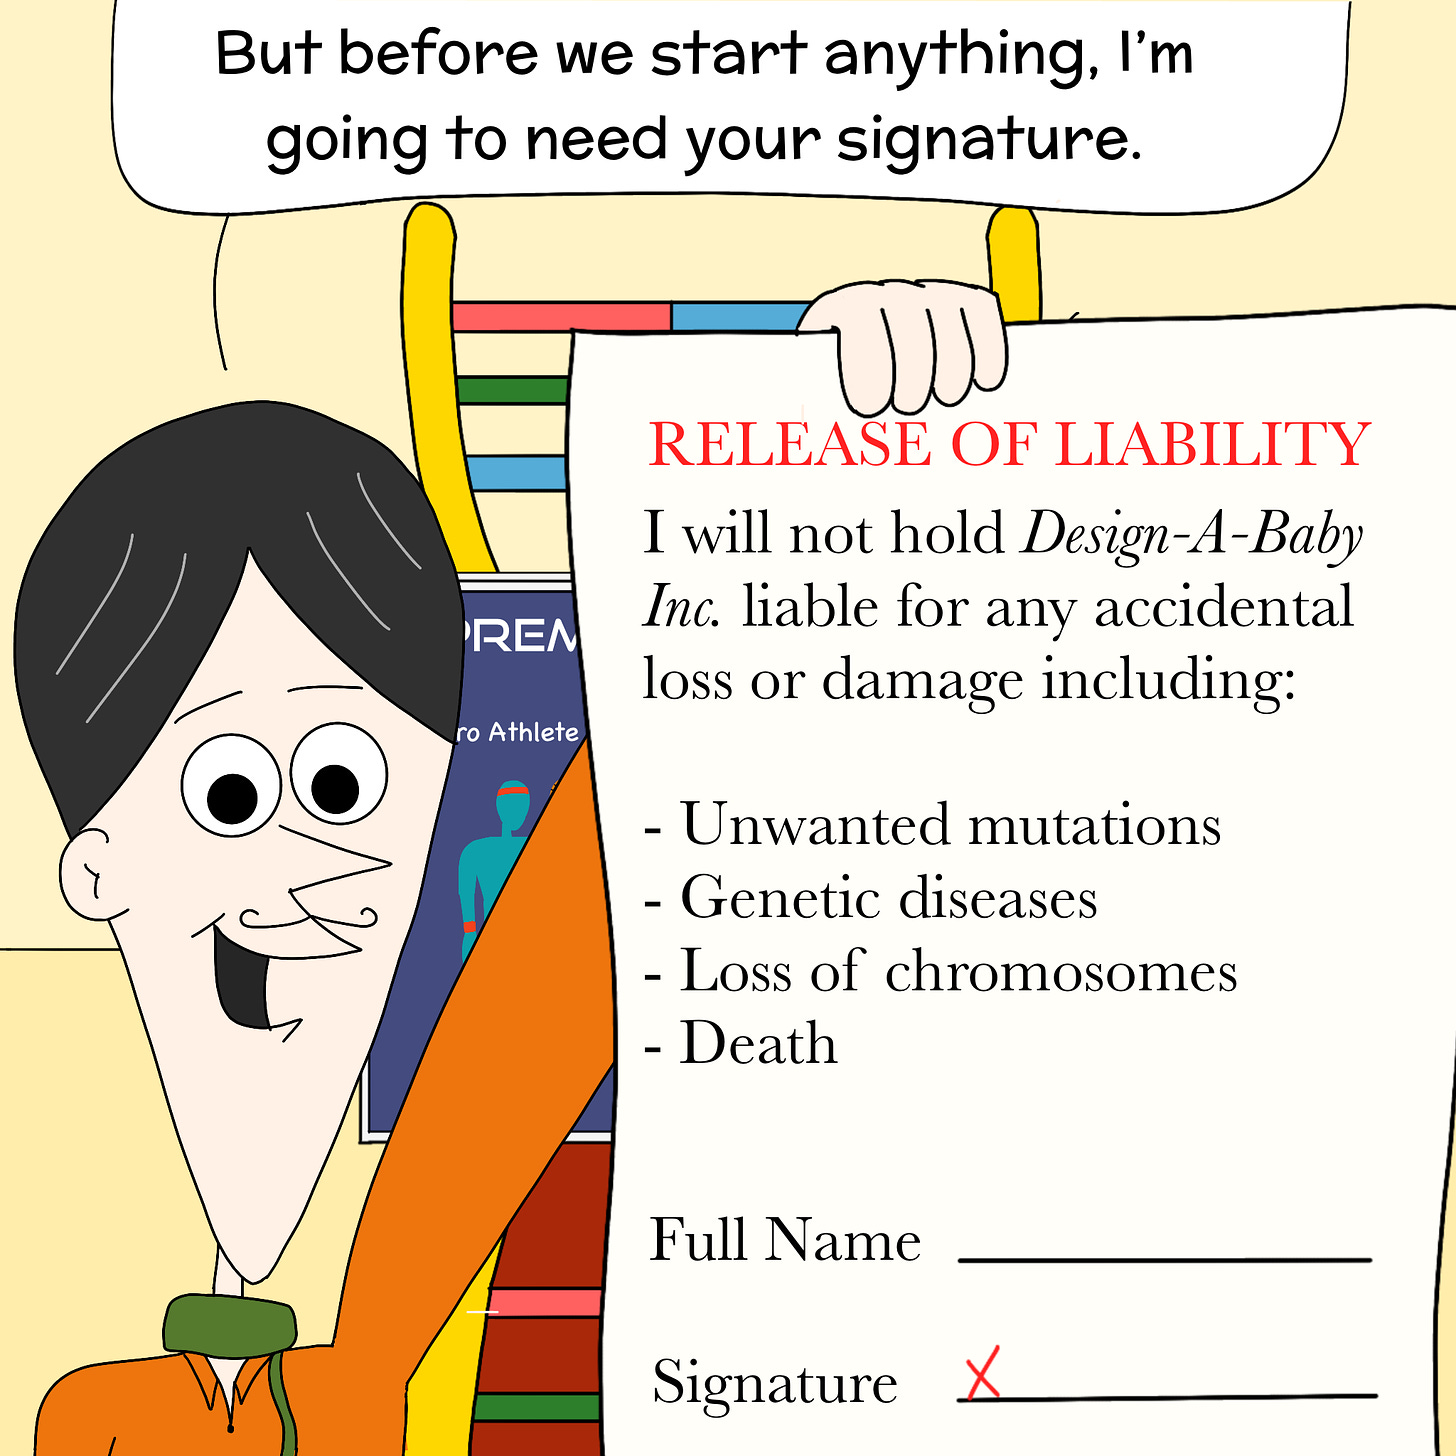 Panel 4: "But before we start anything, I'm going to need your signature", he continues. Alberto pulls out a "Release of Liability" form to protect his company from any accidental loss or damage including unwanted mutations, genetic diseases, loss of chromosomes, and death.